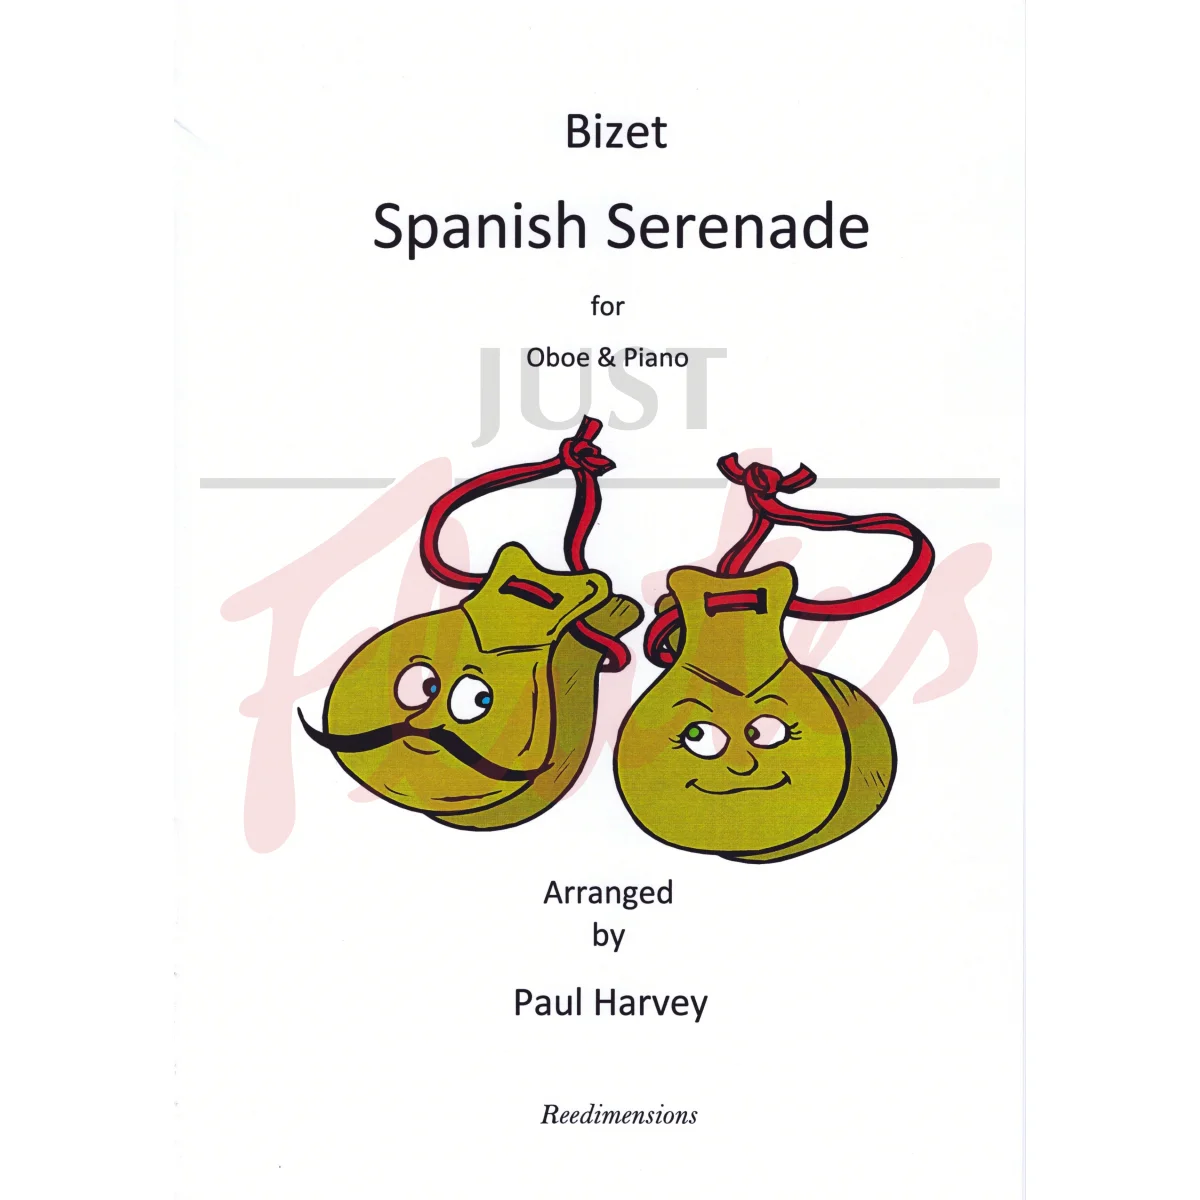 Spanish Serenade for Oboe and Piano